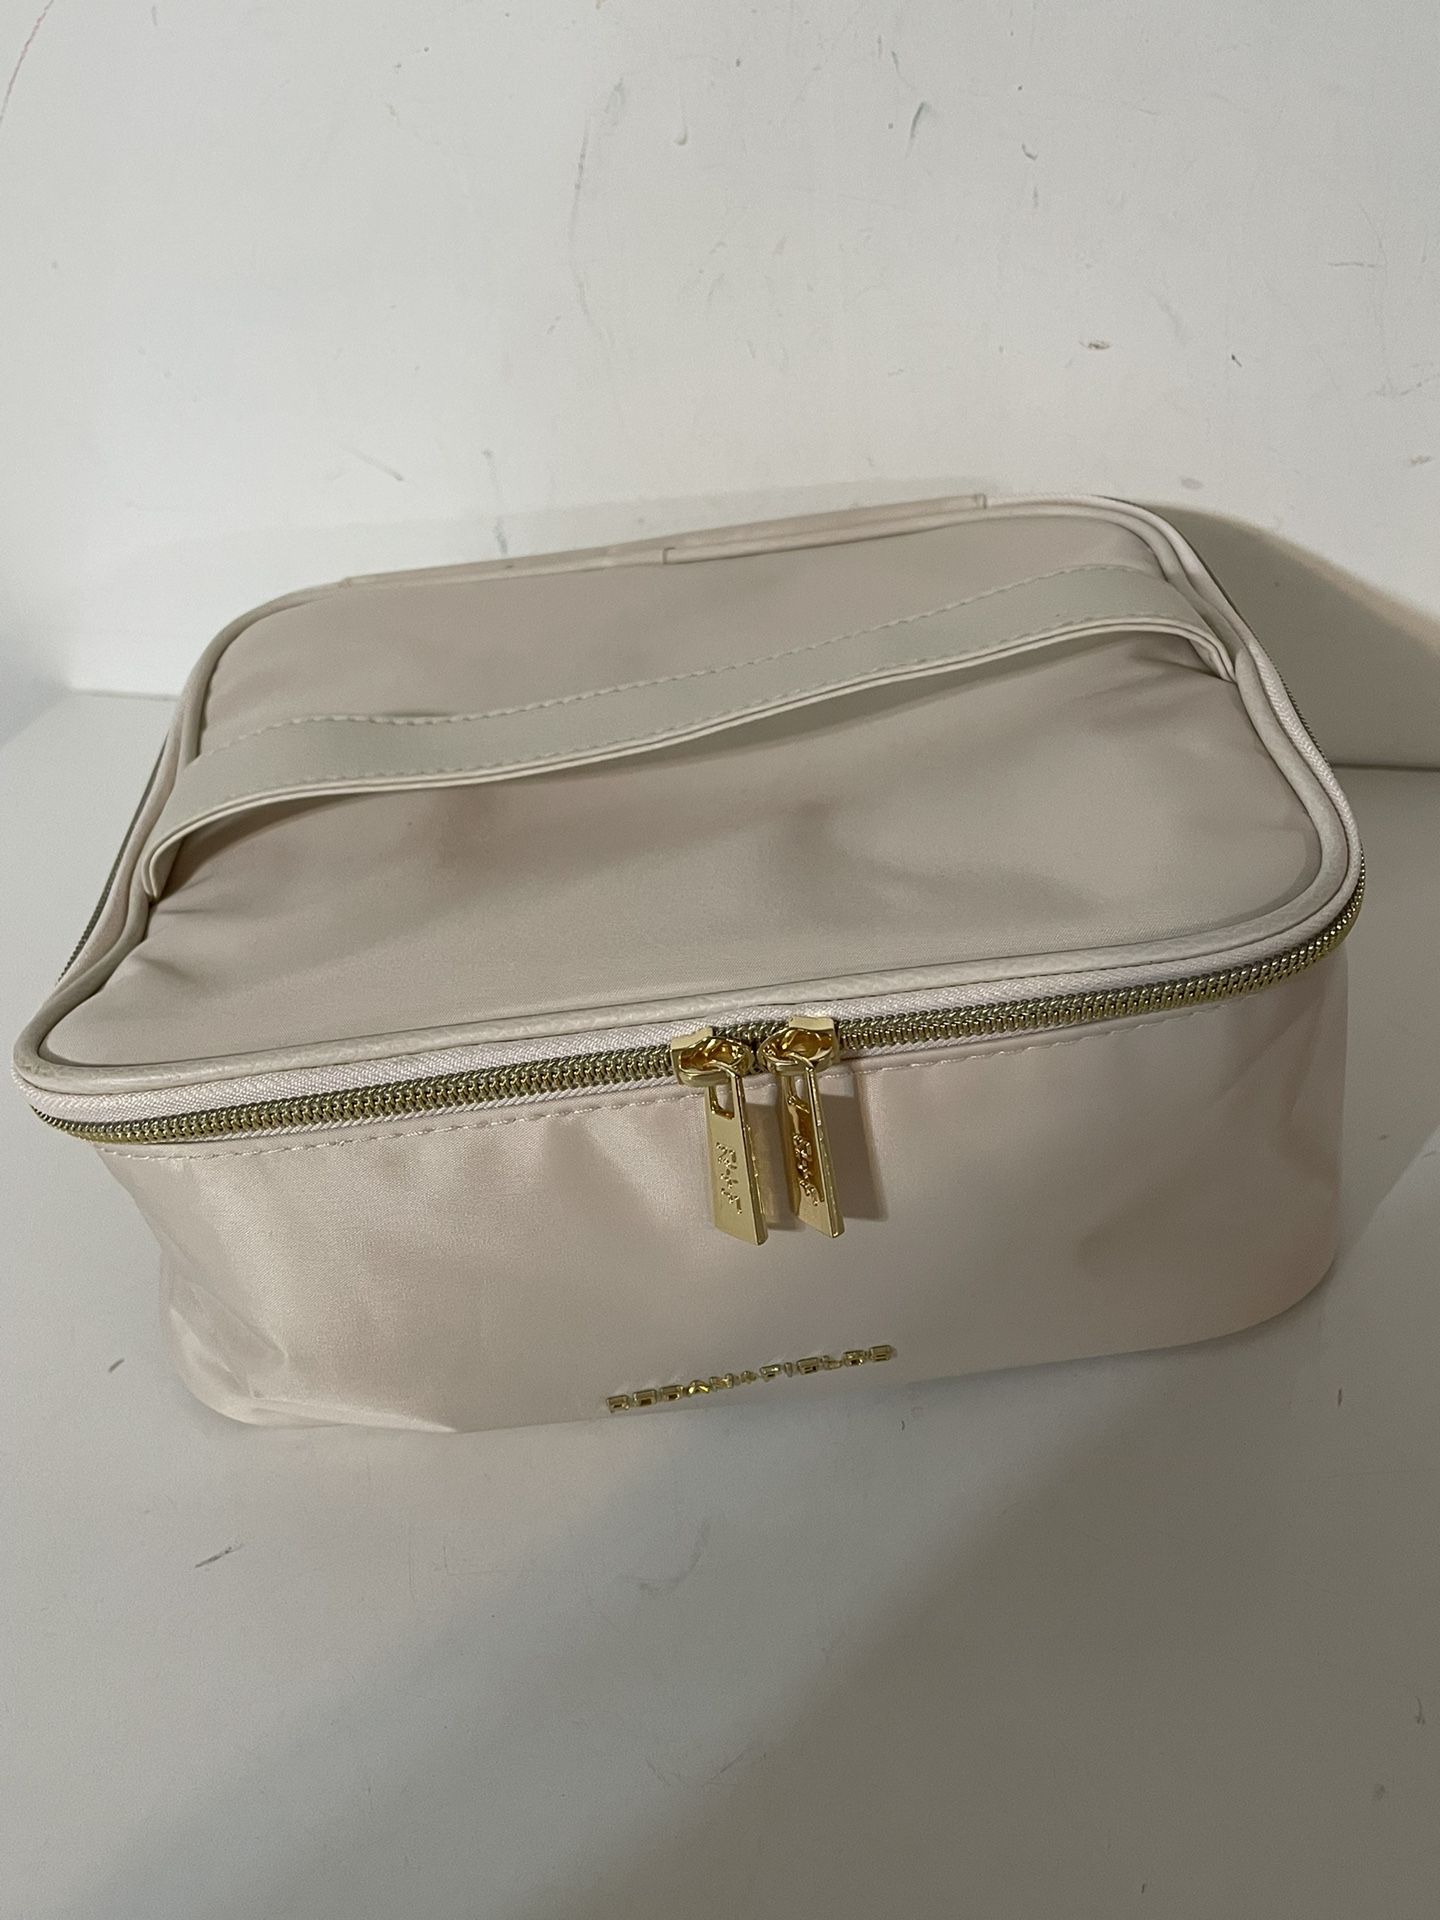 Travel Cosmetic Case Never Used